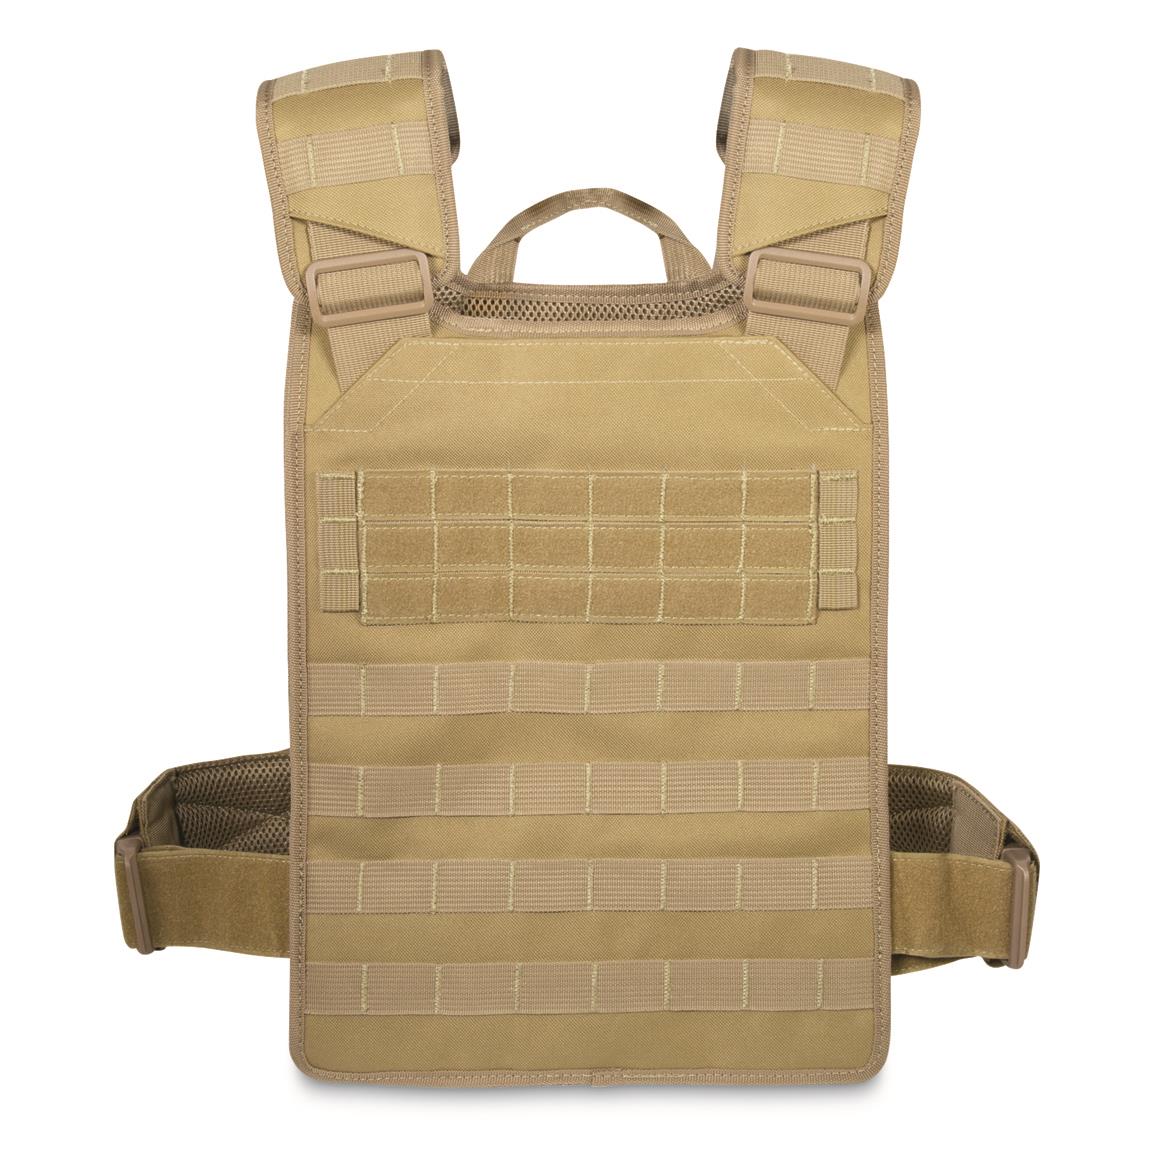 5.11 Tactical Daily Deploy Push Pack - 719648, Armor Plate Carrier ...